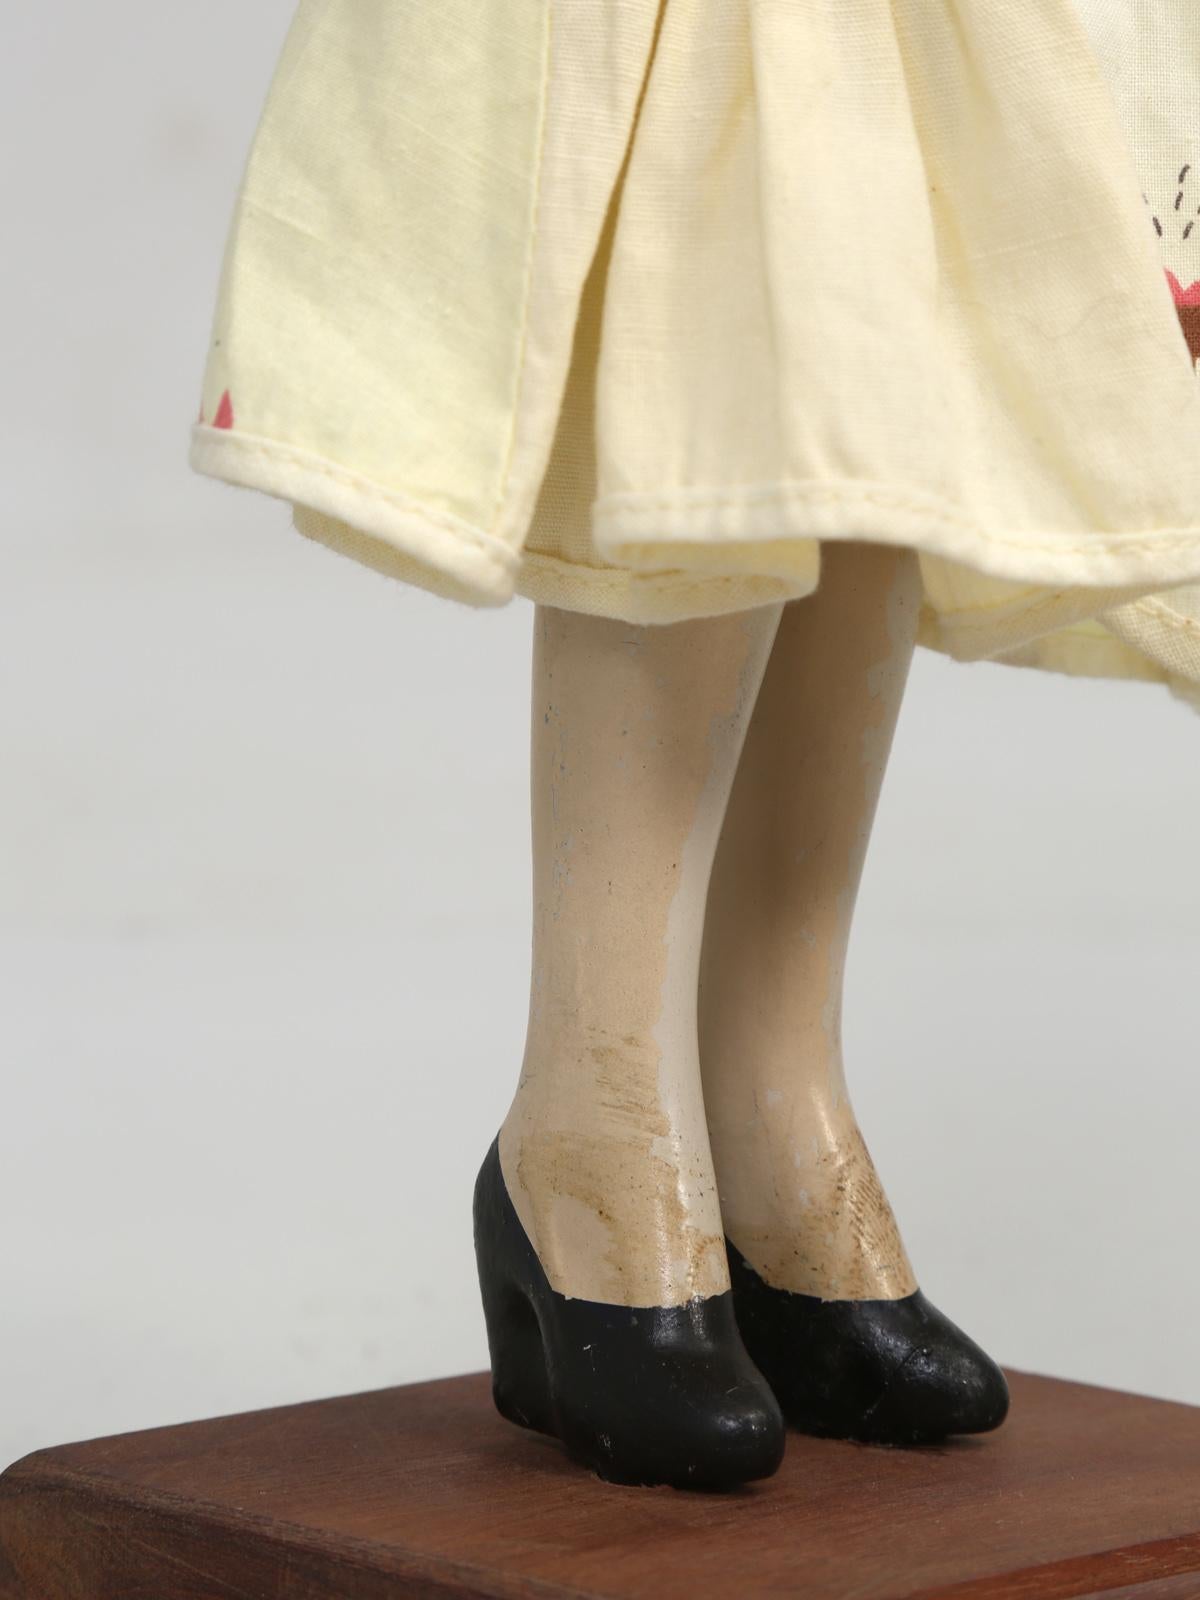 Miniature Department Store Mannequin, Used on a Display Counter 2